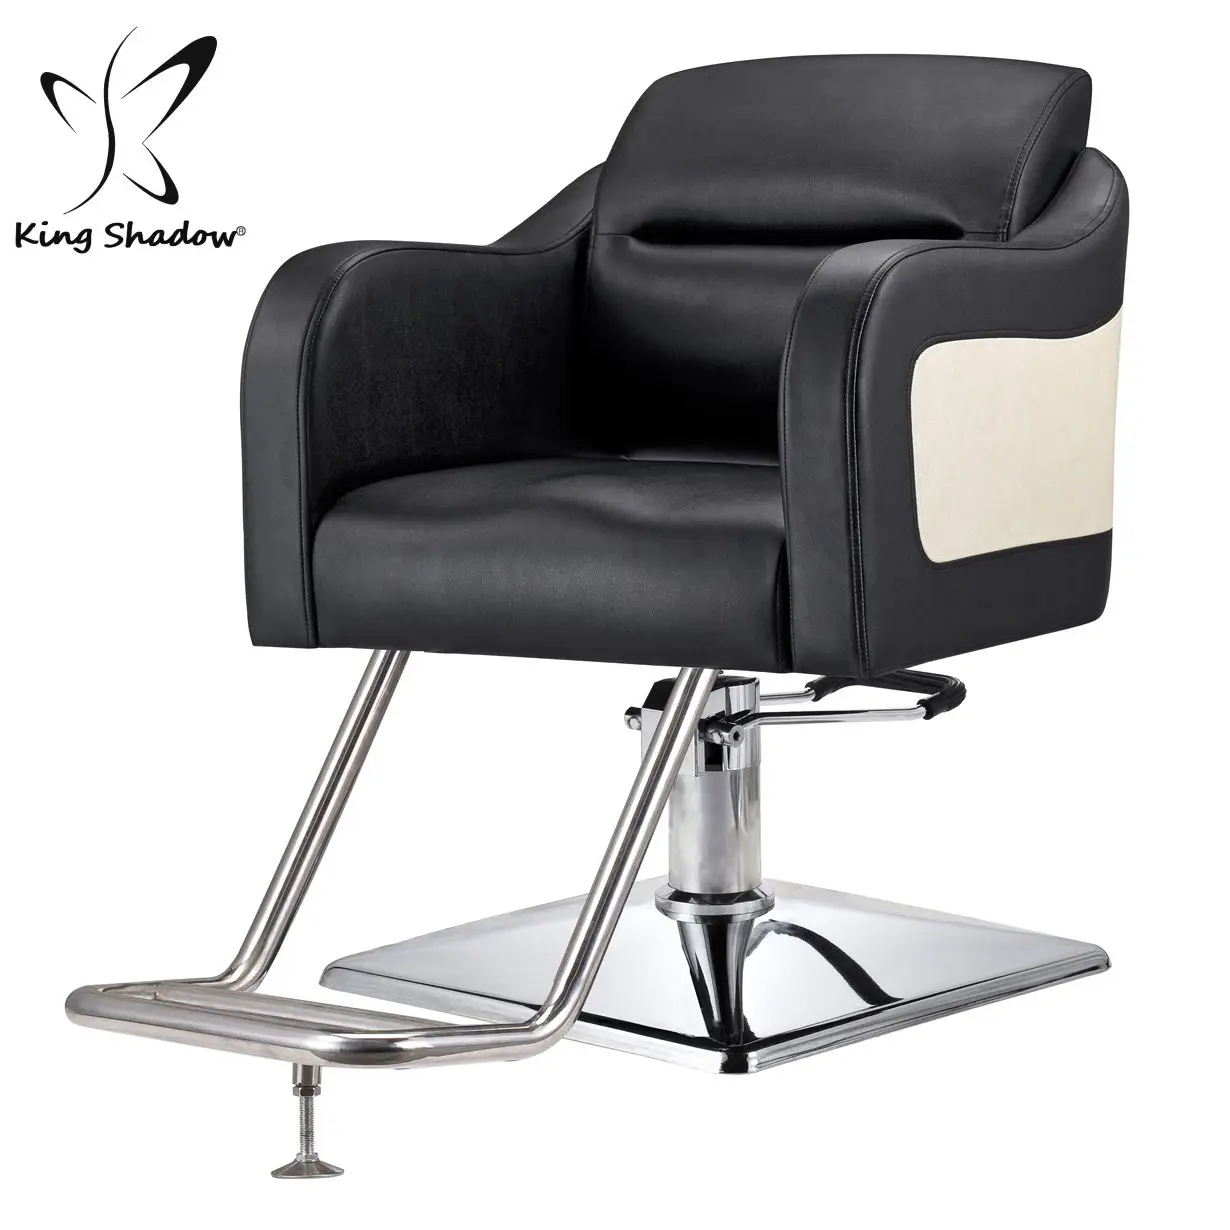 Makeup Reclining Hairdressing Chair Wholesale Barber Supplies Buy Hairdressing Massage Chair And Basin Wholesale Barber Supplies Barber Chair Product On Alibaba Com